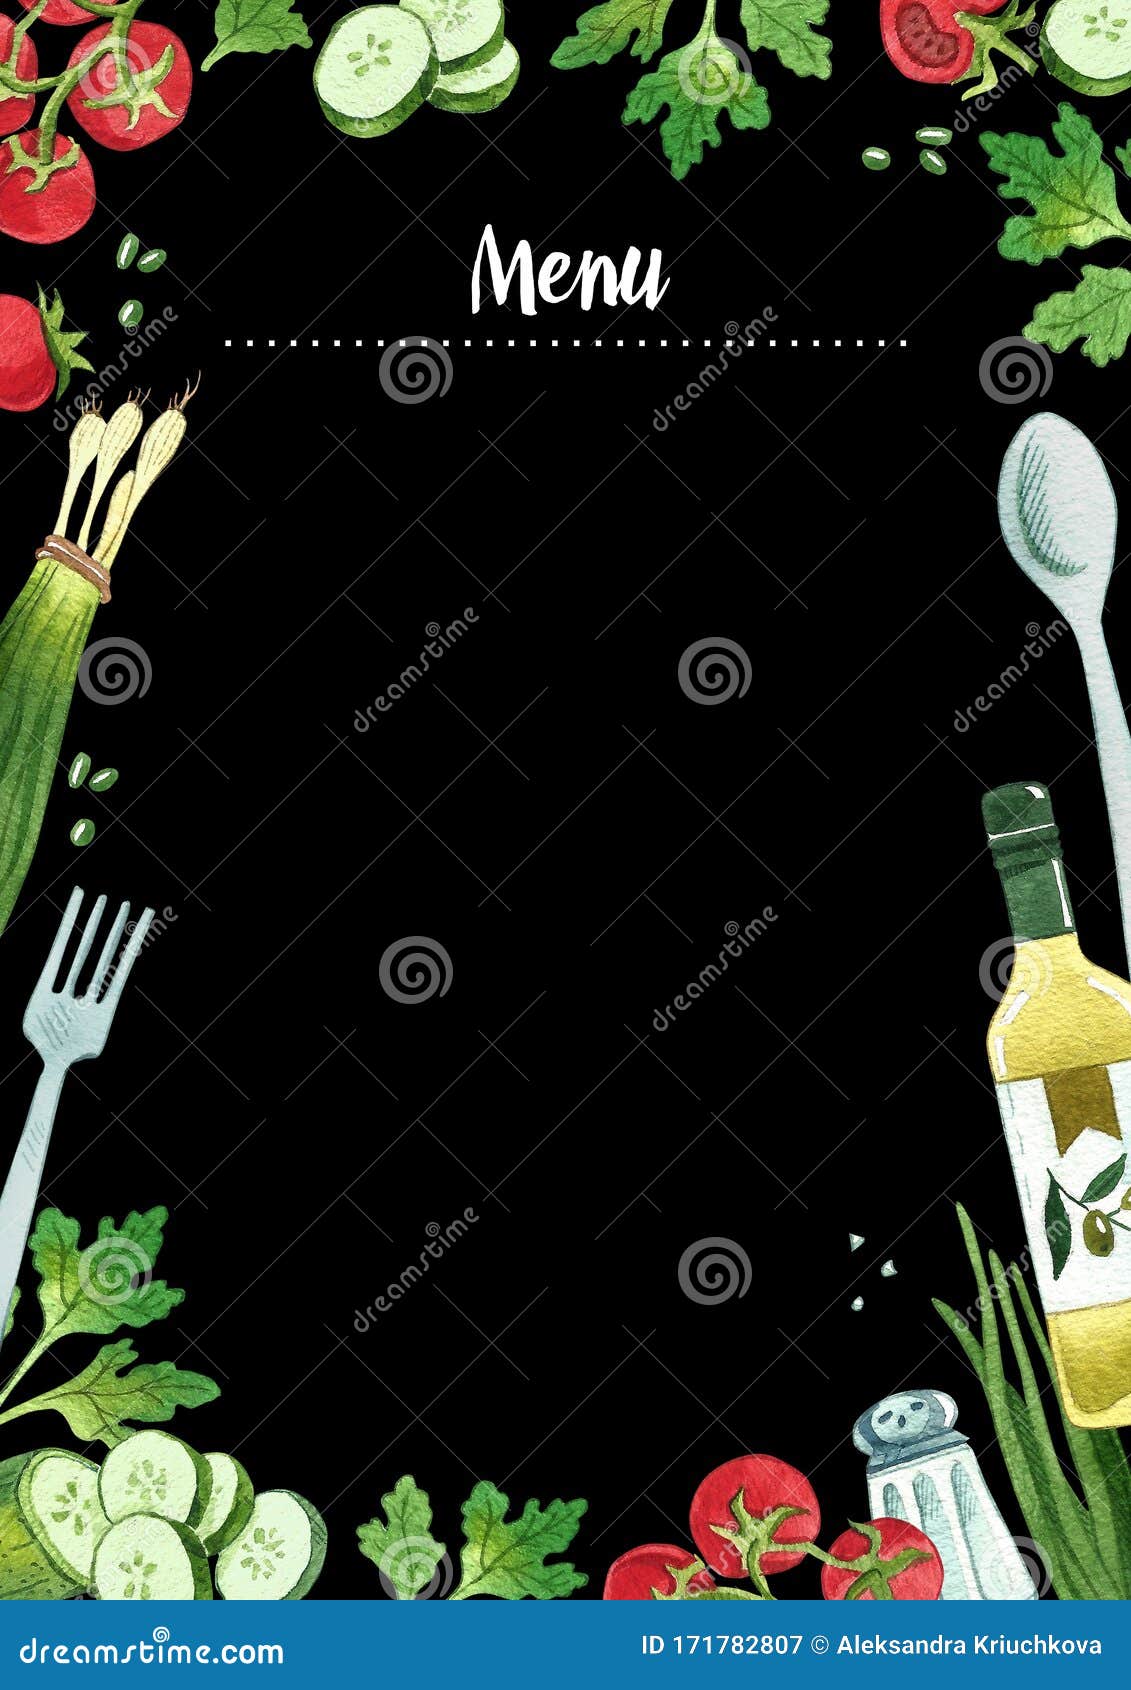 Watercolor Healthy Food Background. for Design Menu. Stock Image - Image of  cucumber, avocado: 171782807